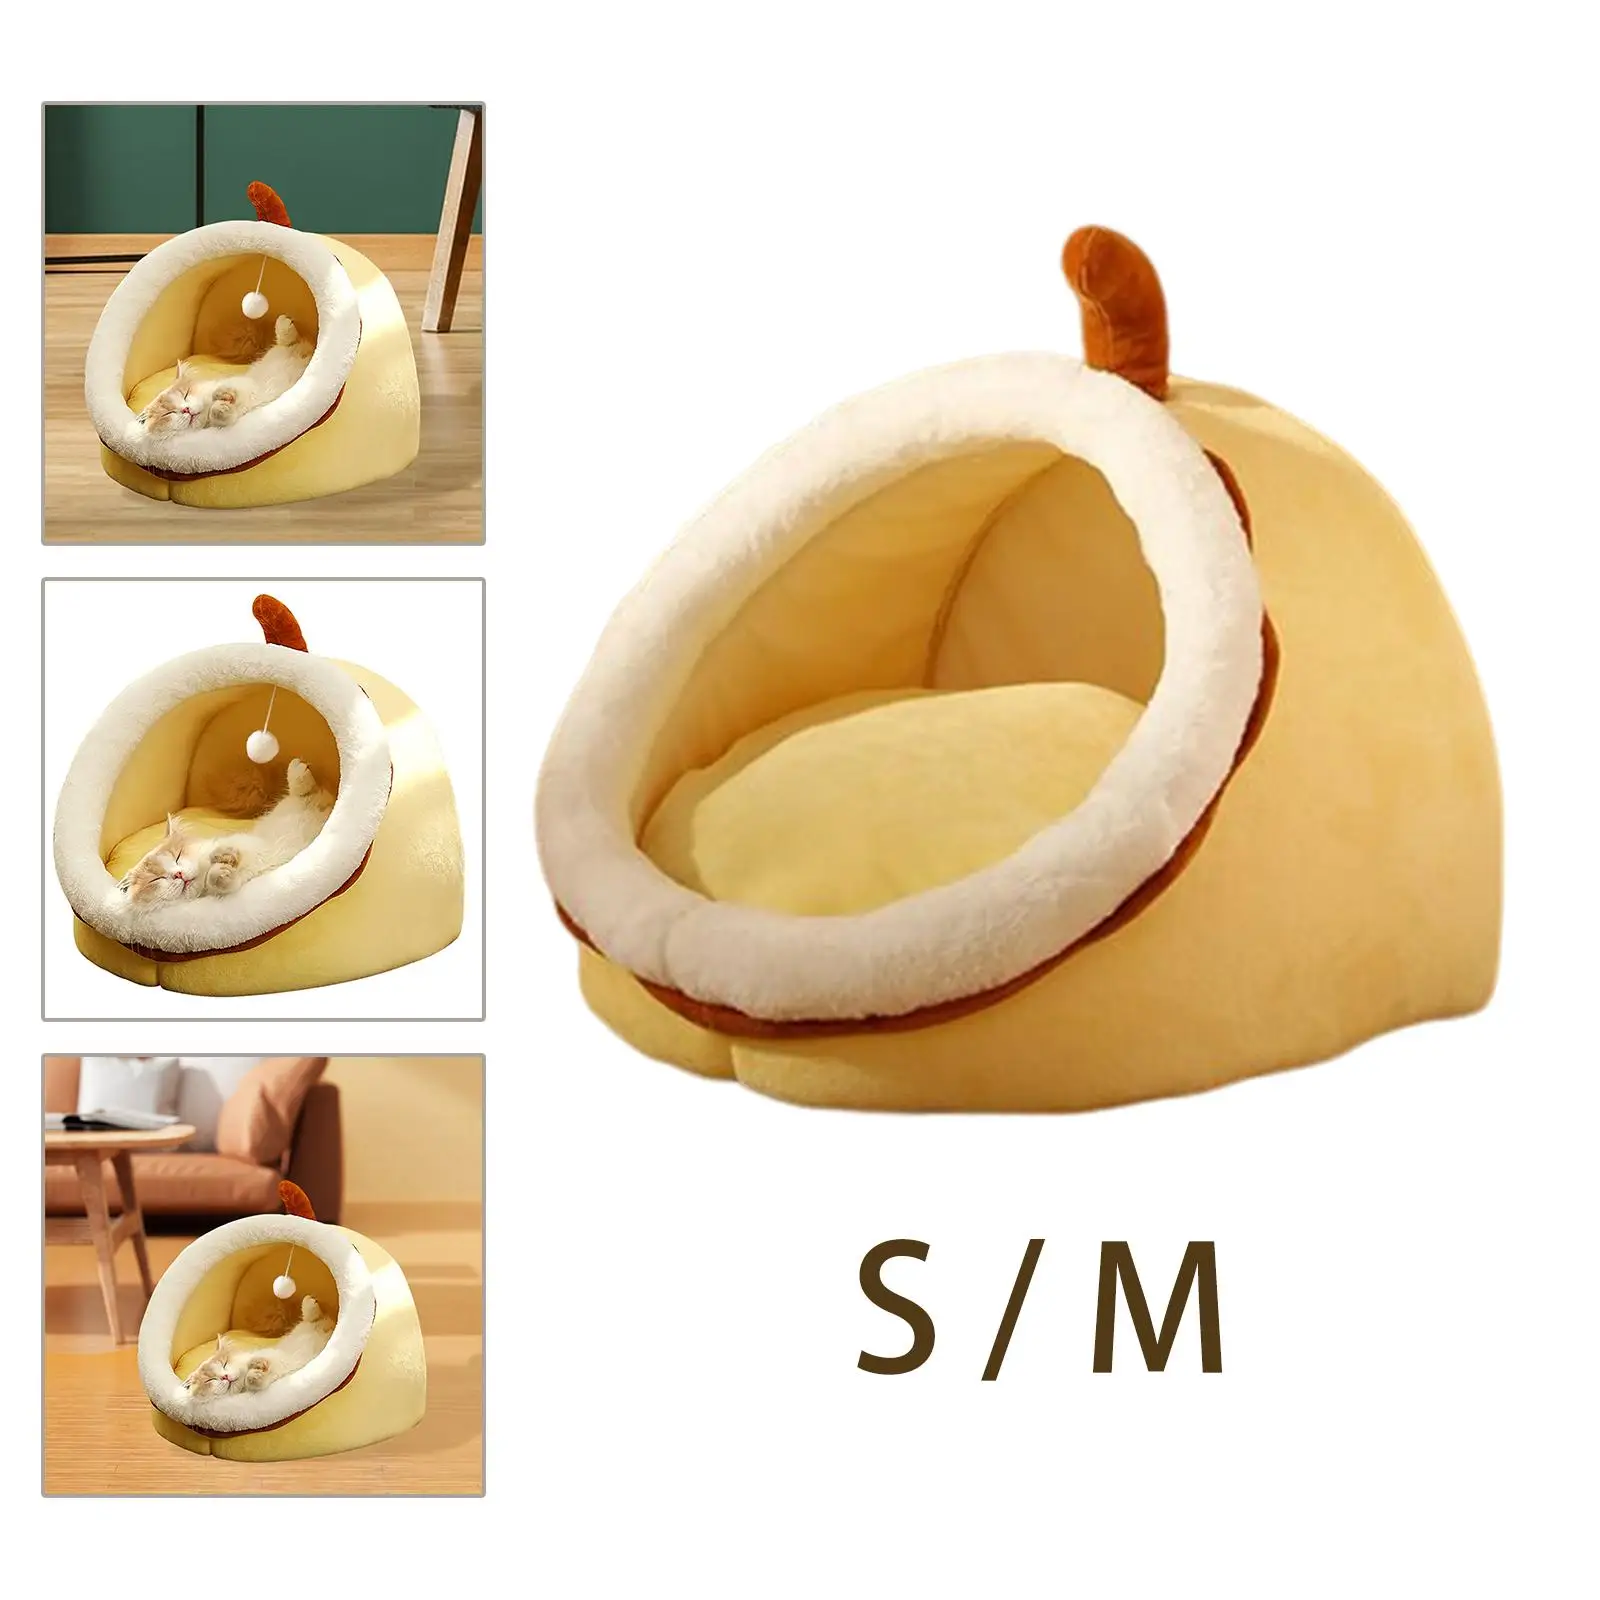 Cute Bed Anti Slip Bottom Kennel Cushion Nest Sleeping Basket Dog House for Kitten Puppy Dog Indoor Cats Cats